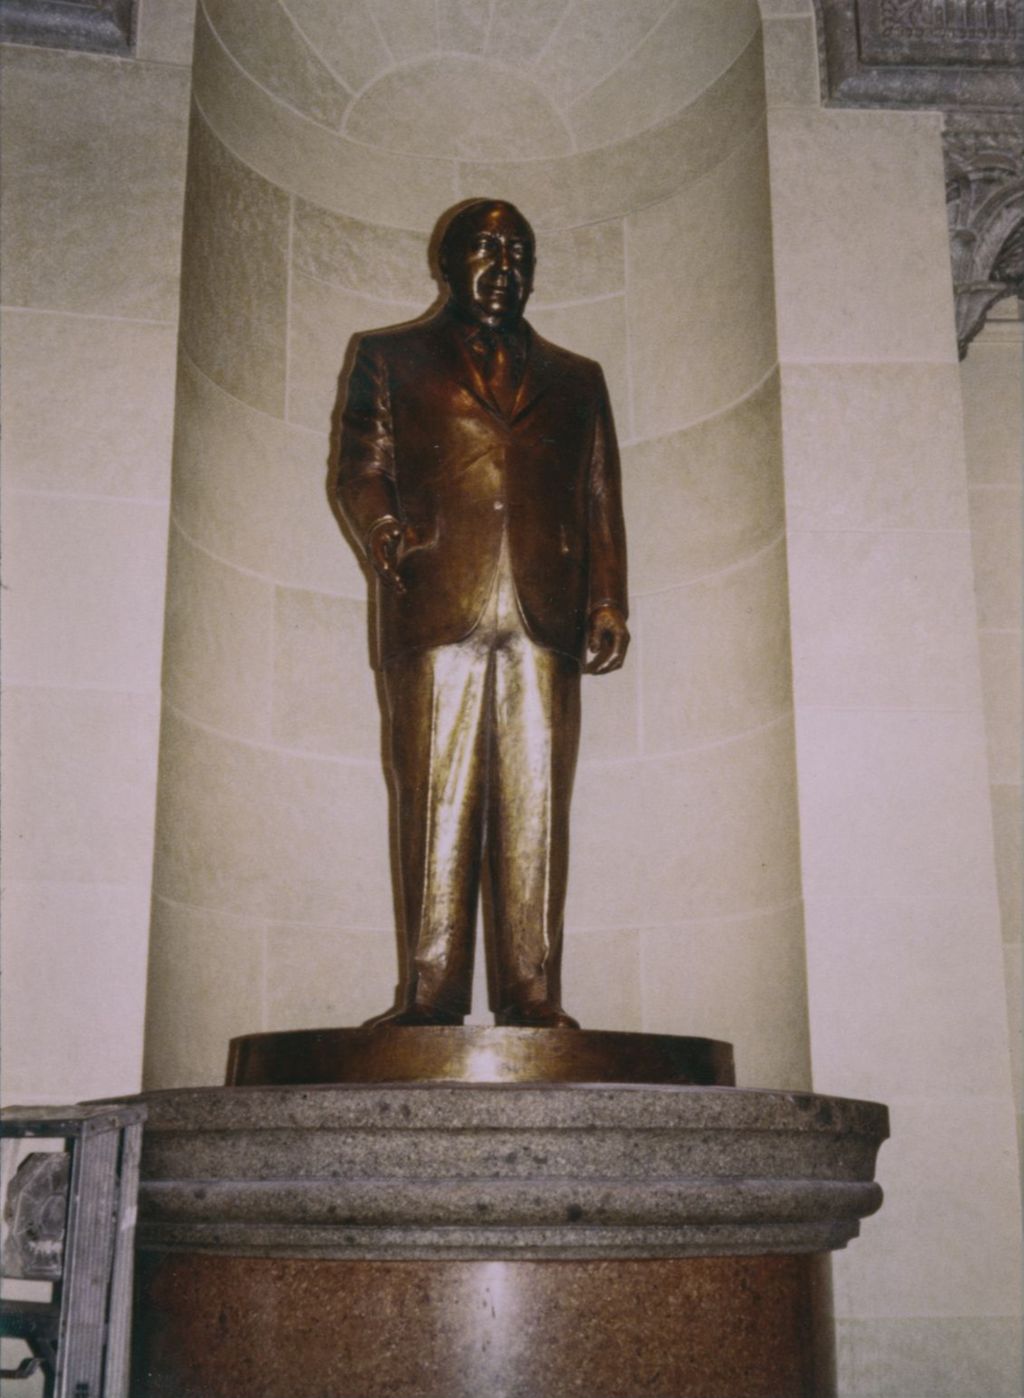 The Richard J. Daley statue installed